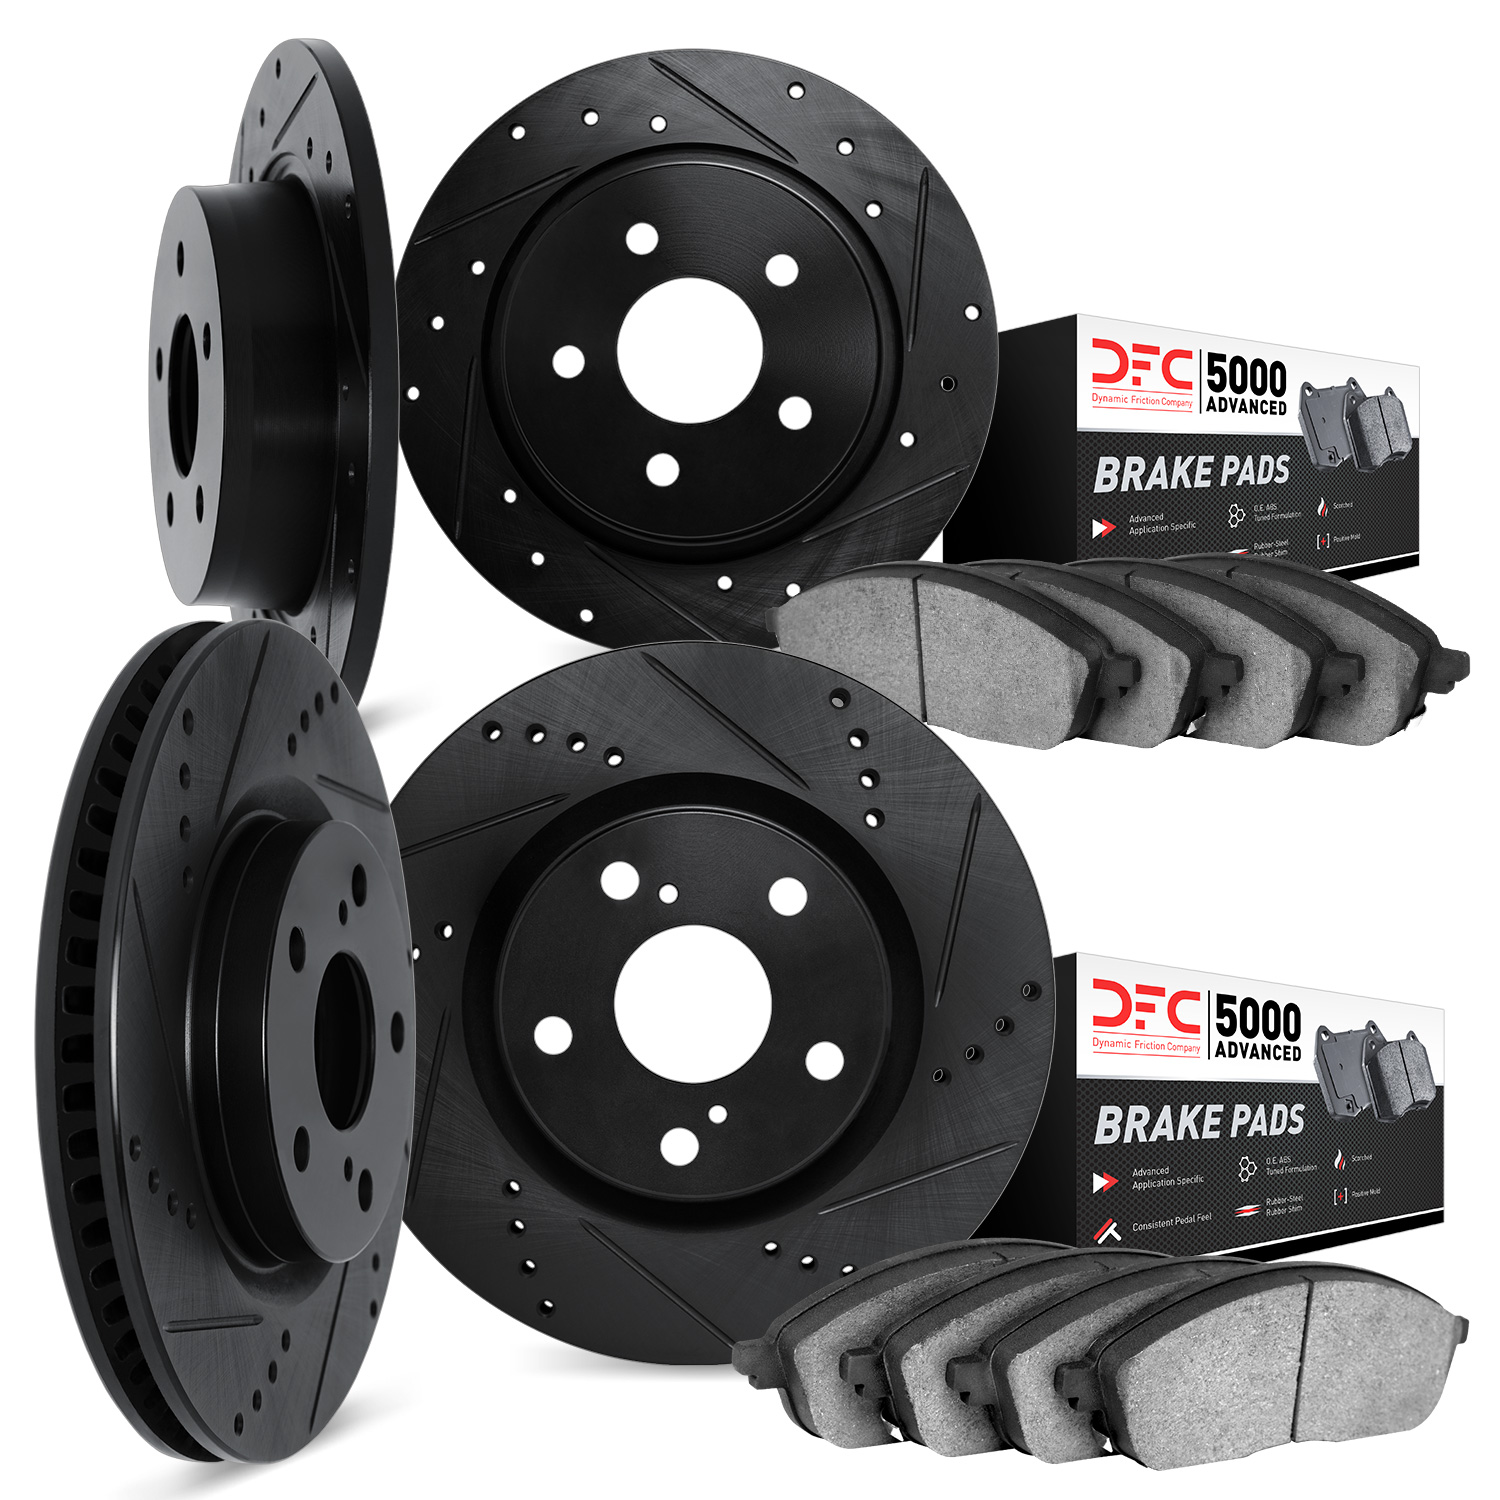 8504-76130 Drilled/Slotted Brake Rotors w/5000 Advanced Brake Pads Kit [Black], 1992-1996 Lexus/Toyota/Scion, Position: Front an